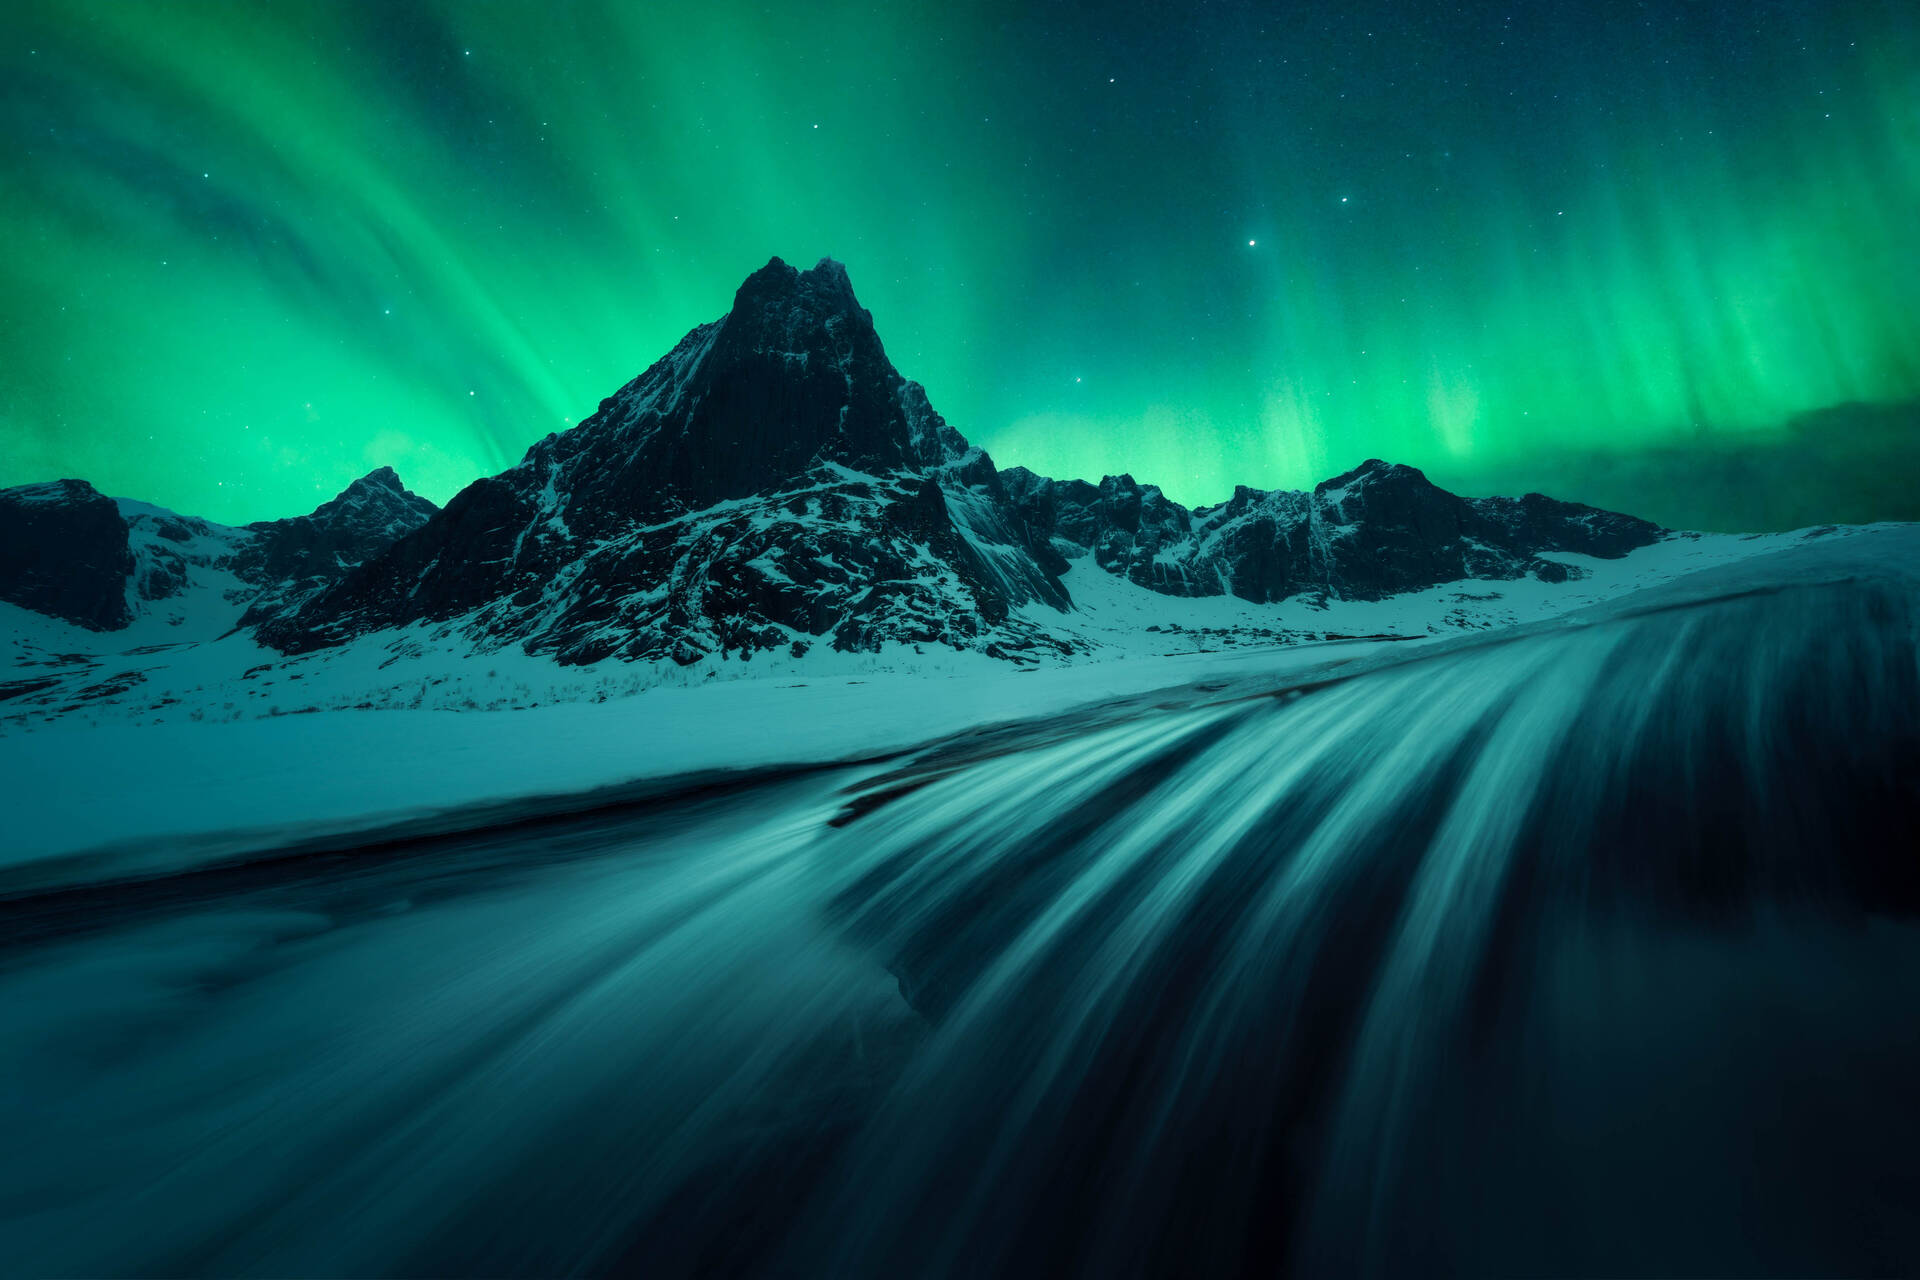 Bright green Aurora covering the entire night sky over a mountain